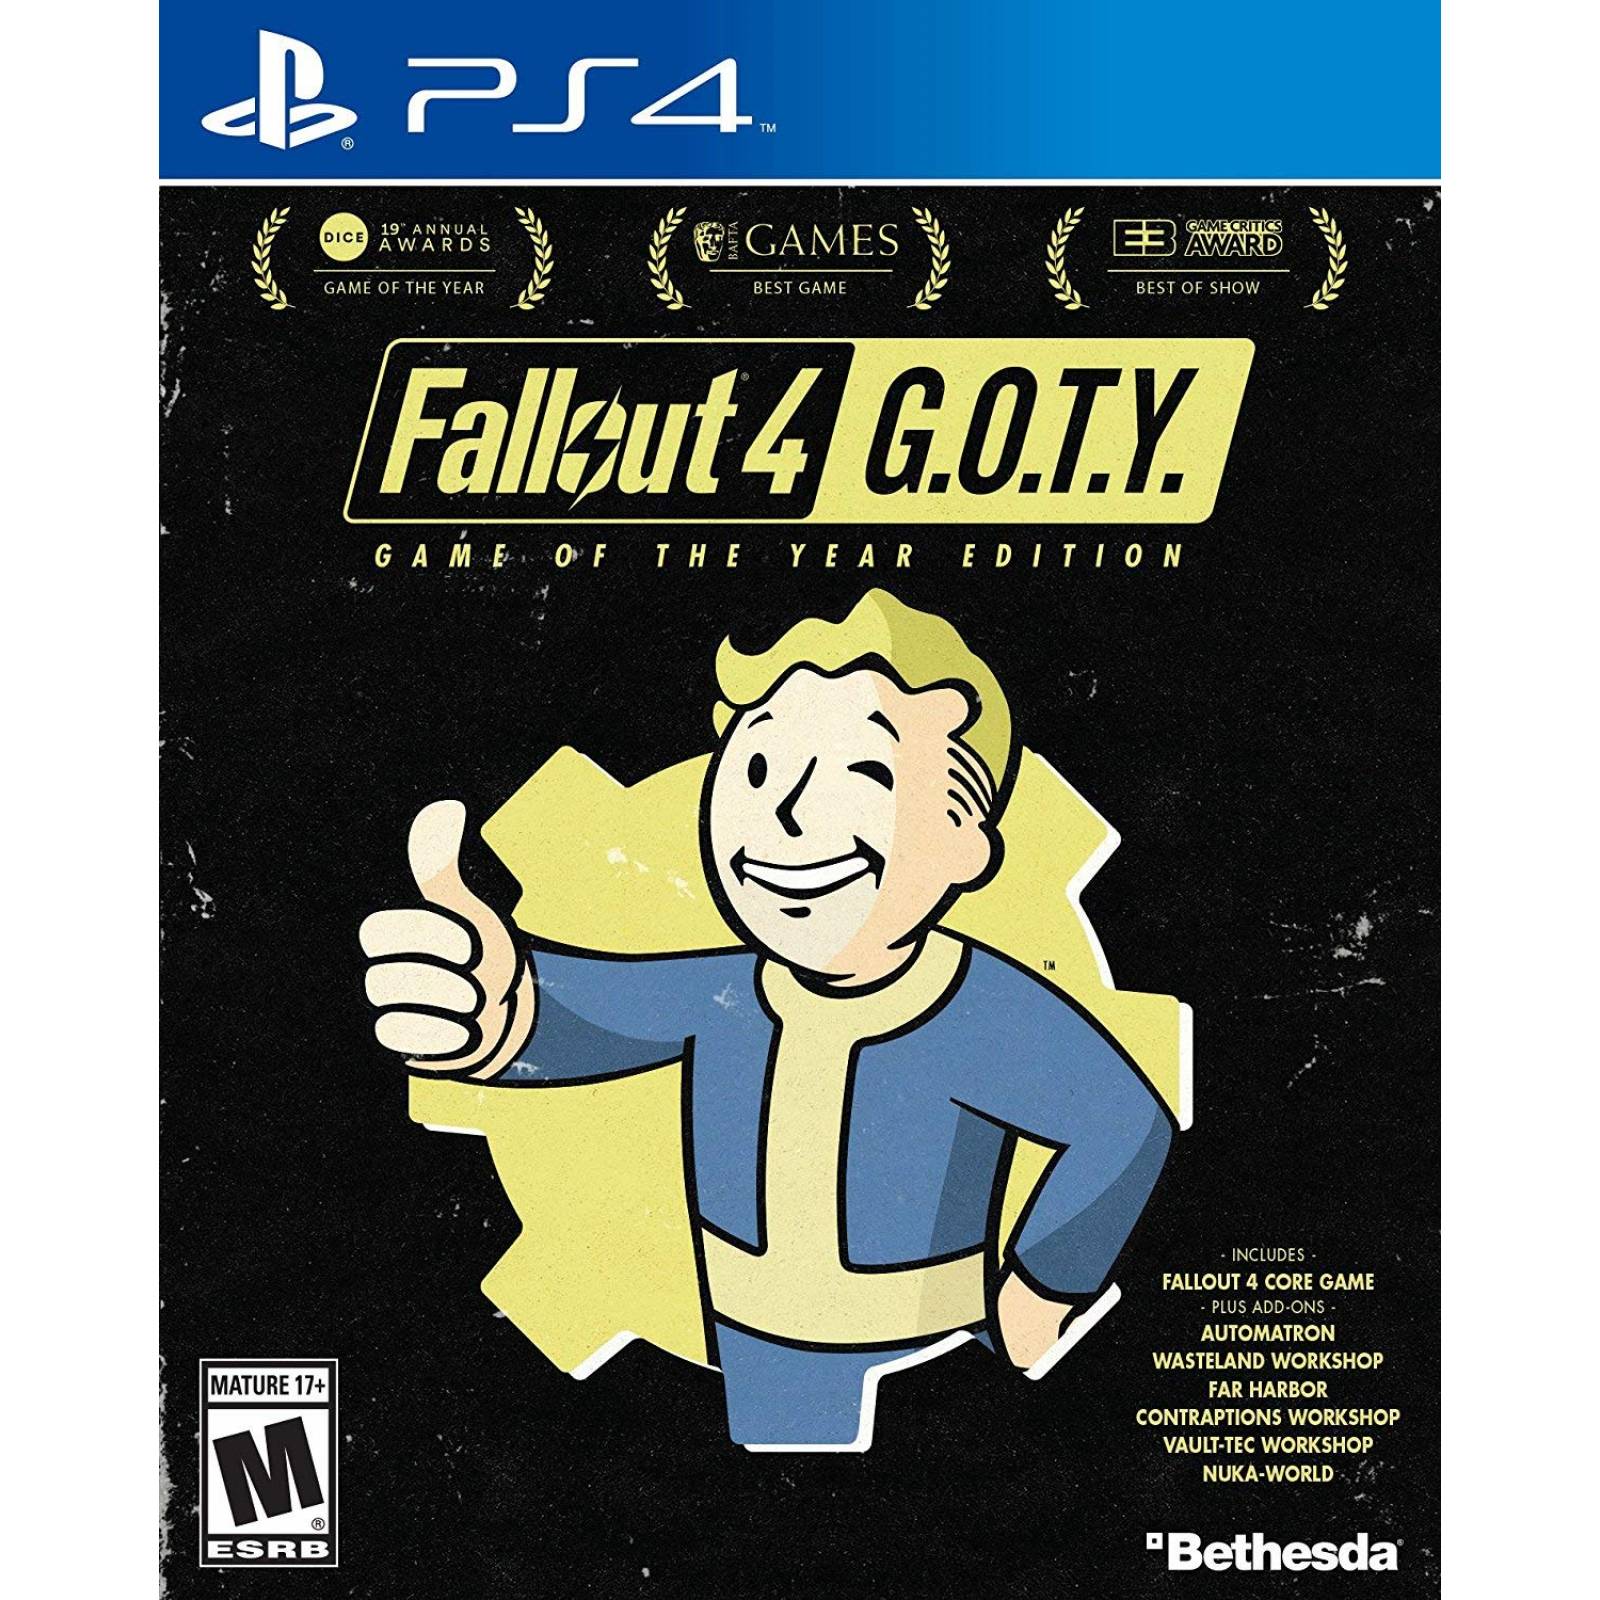 PS4 Fallout 4 G.O.T.Y